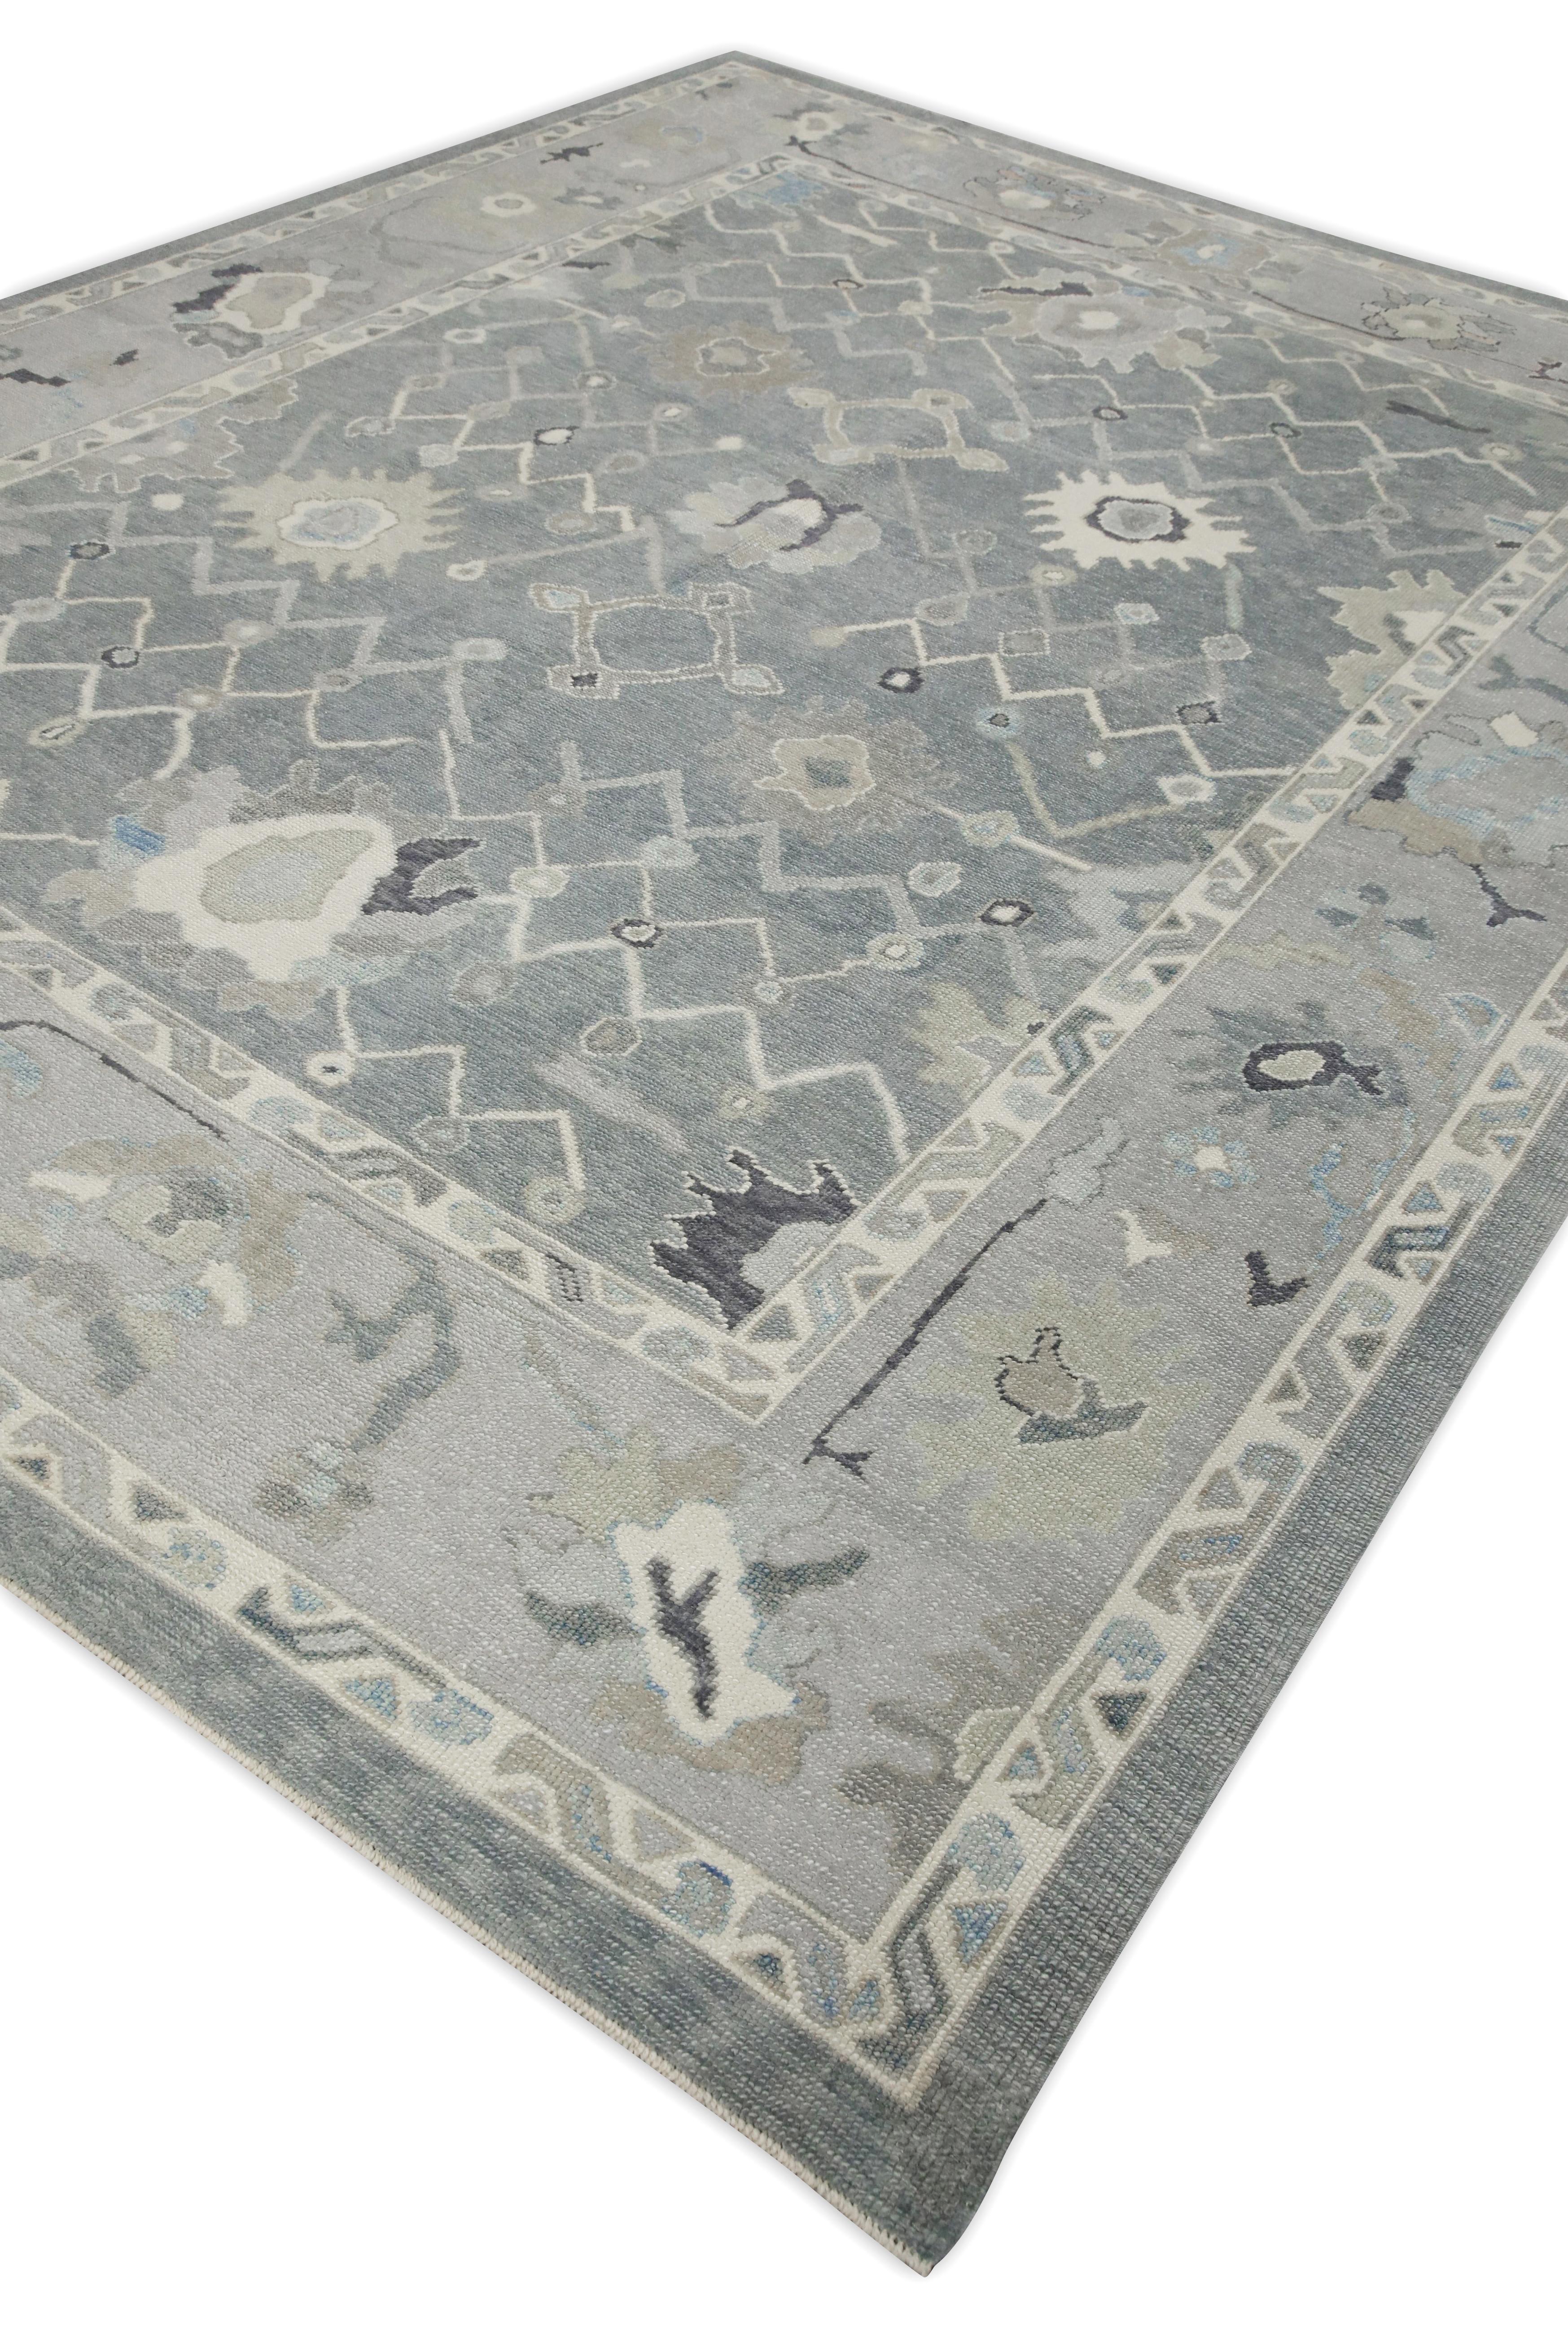 Contemporary Gray & Blue Floral Design Handwoven Wool Turkish Oushak Rug 9'2